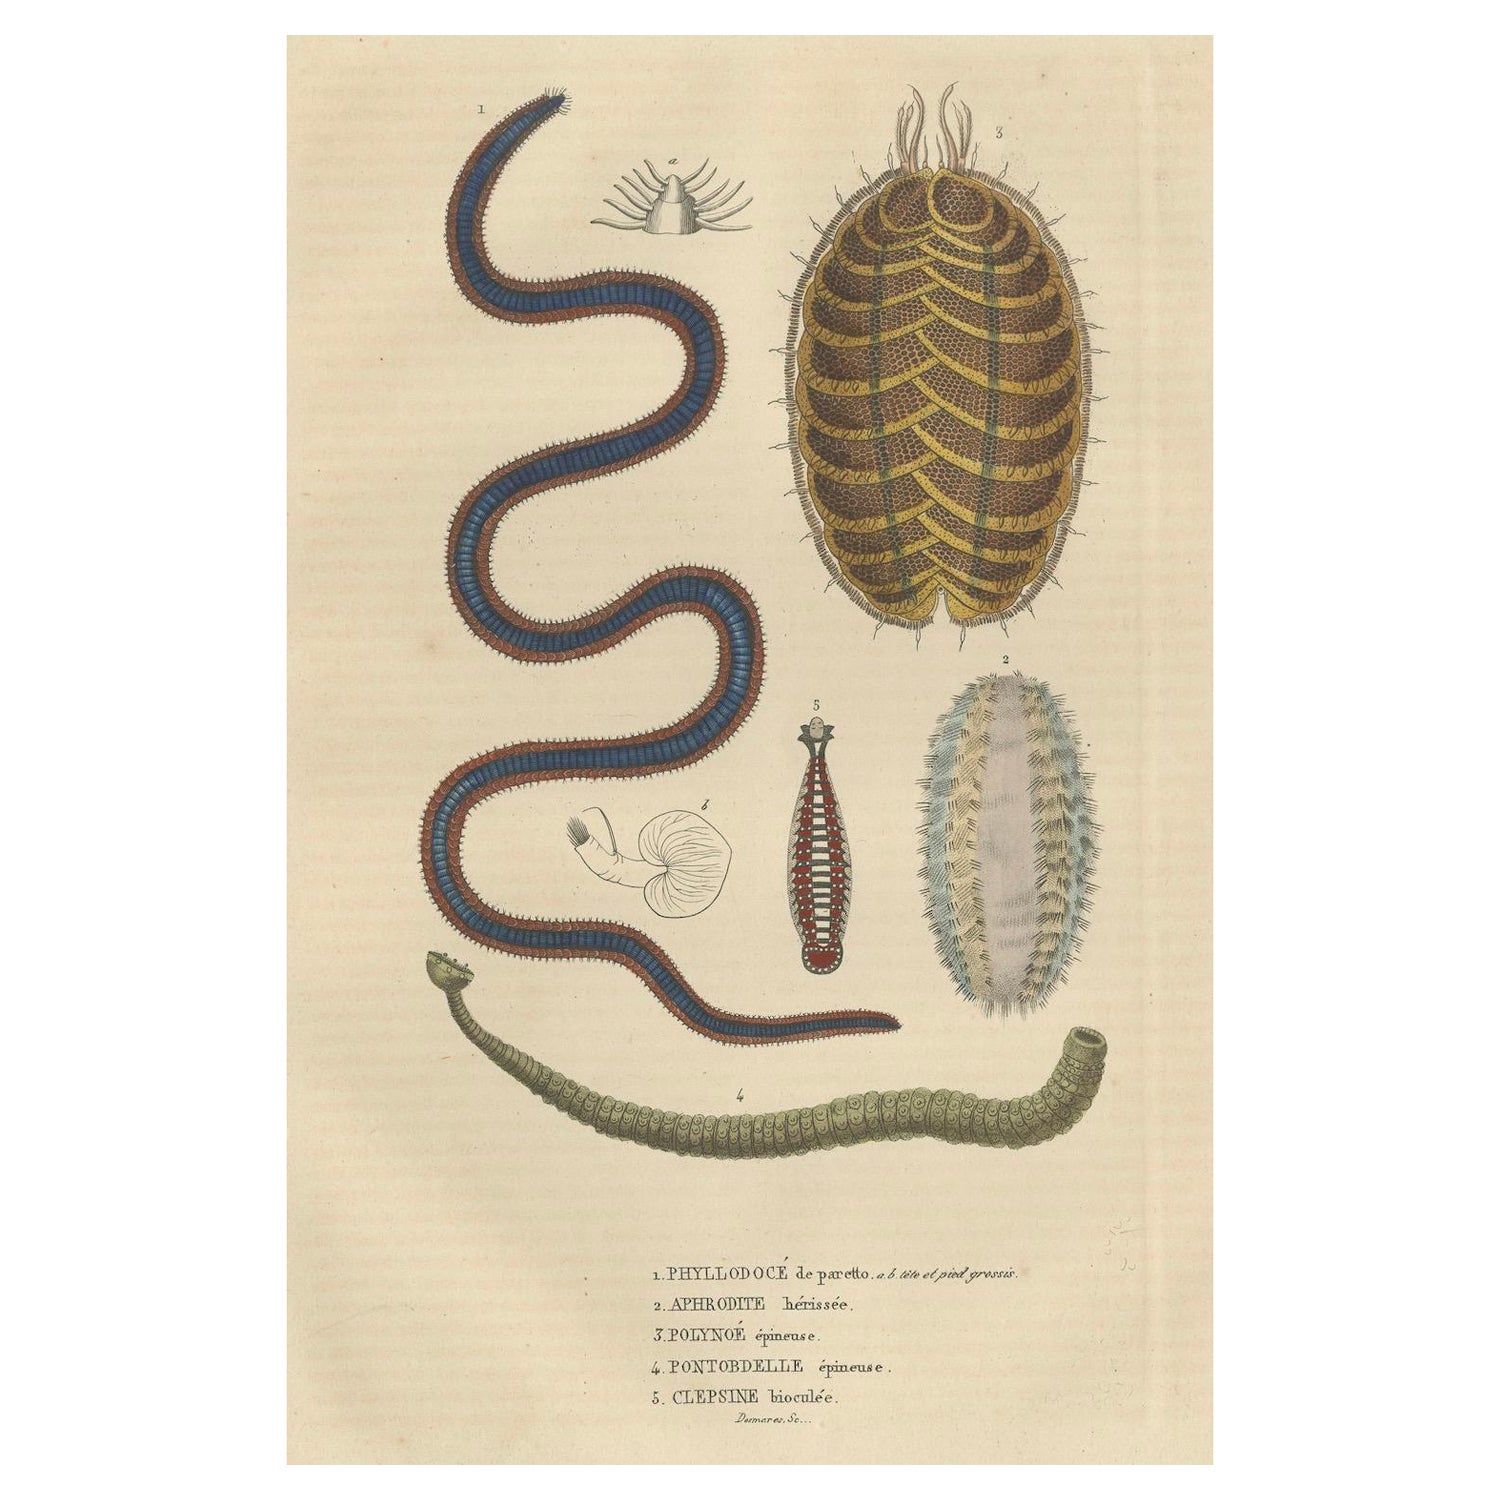 Varieties of Marine Invertebrates: Spined Worms and Bicolored Leech, 1845 For Sale